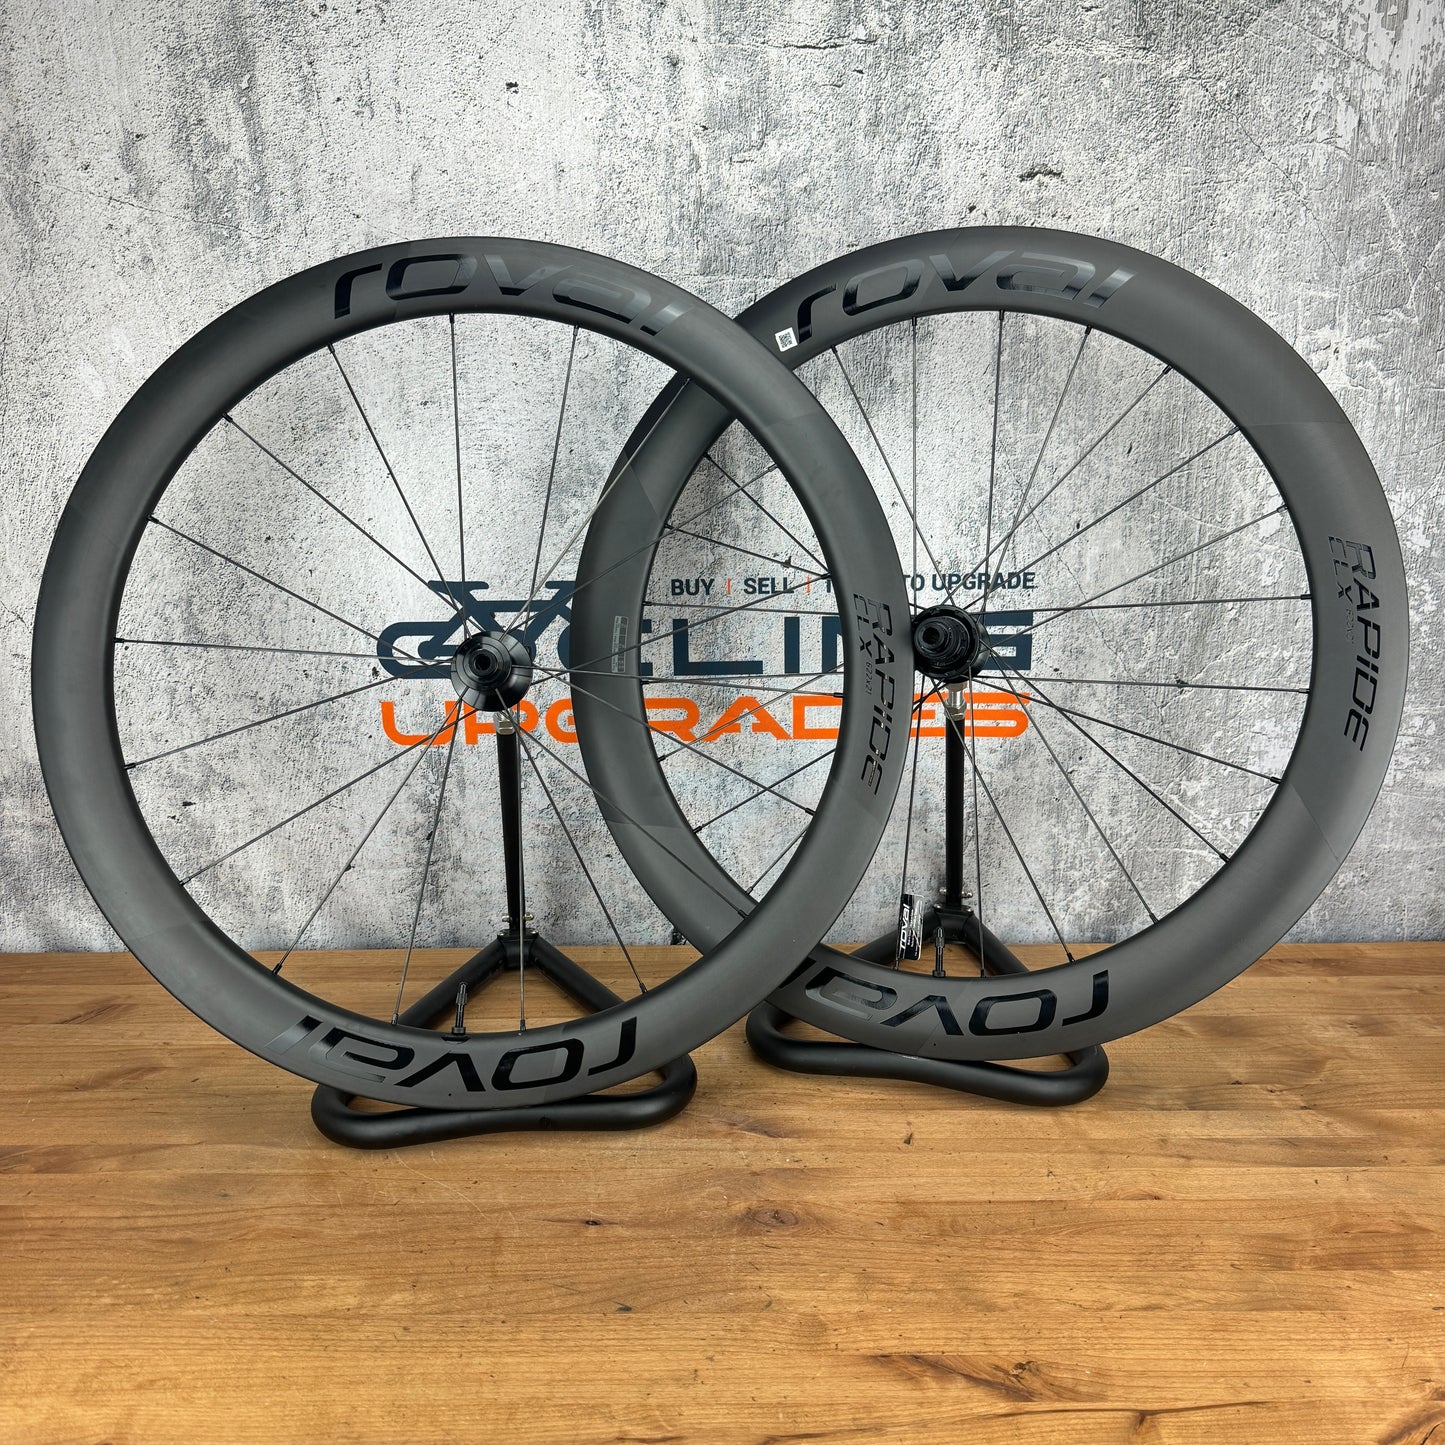 New! Roval Rapide CLX II Carbon Tubeless Disc Wheelset 700c 1489g Ceramic